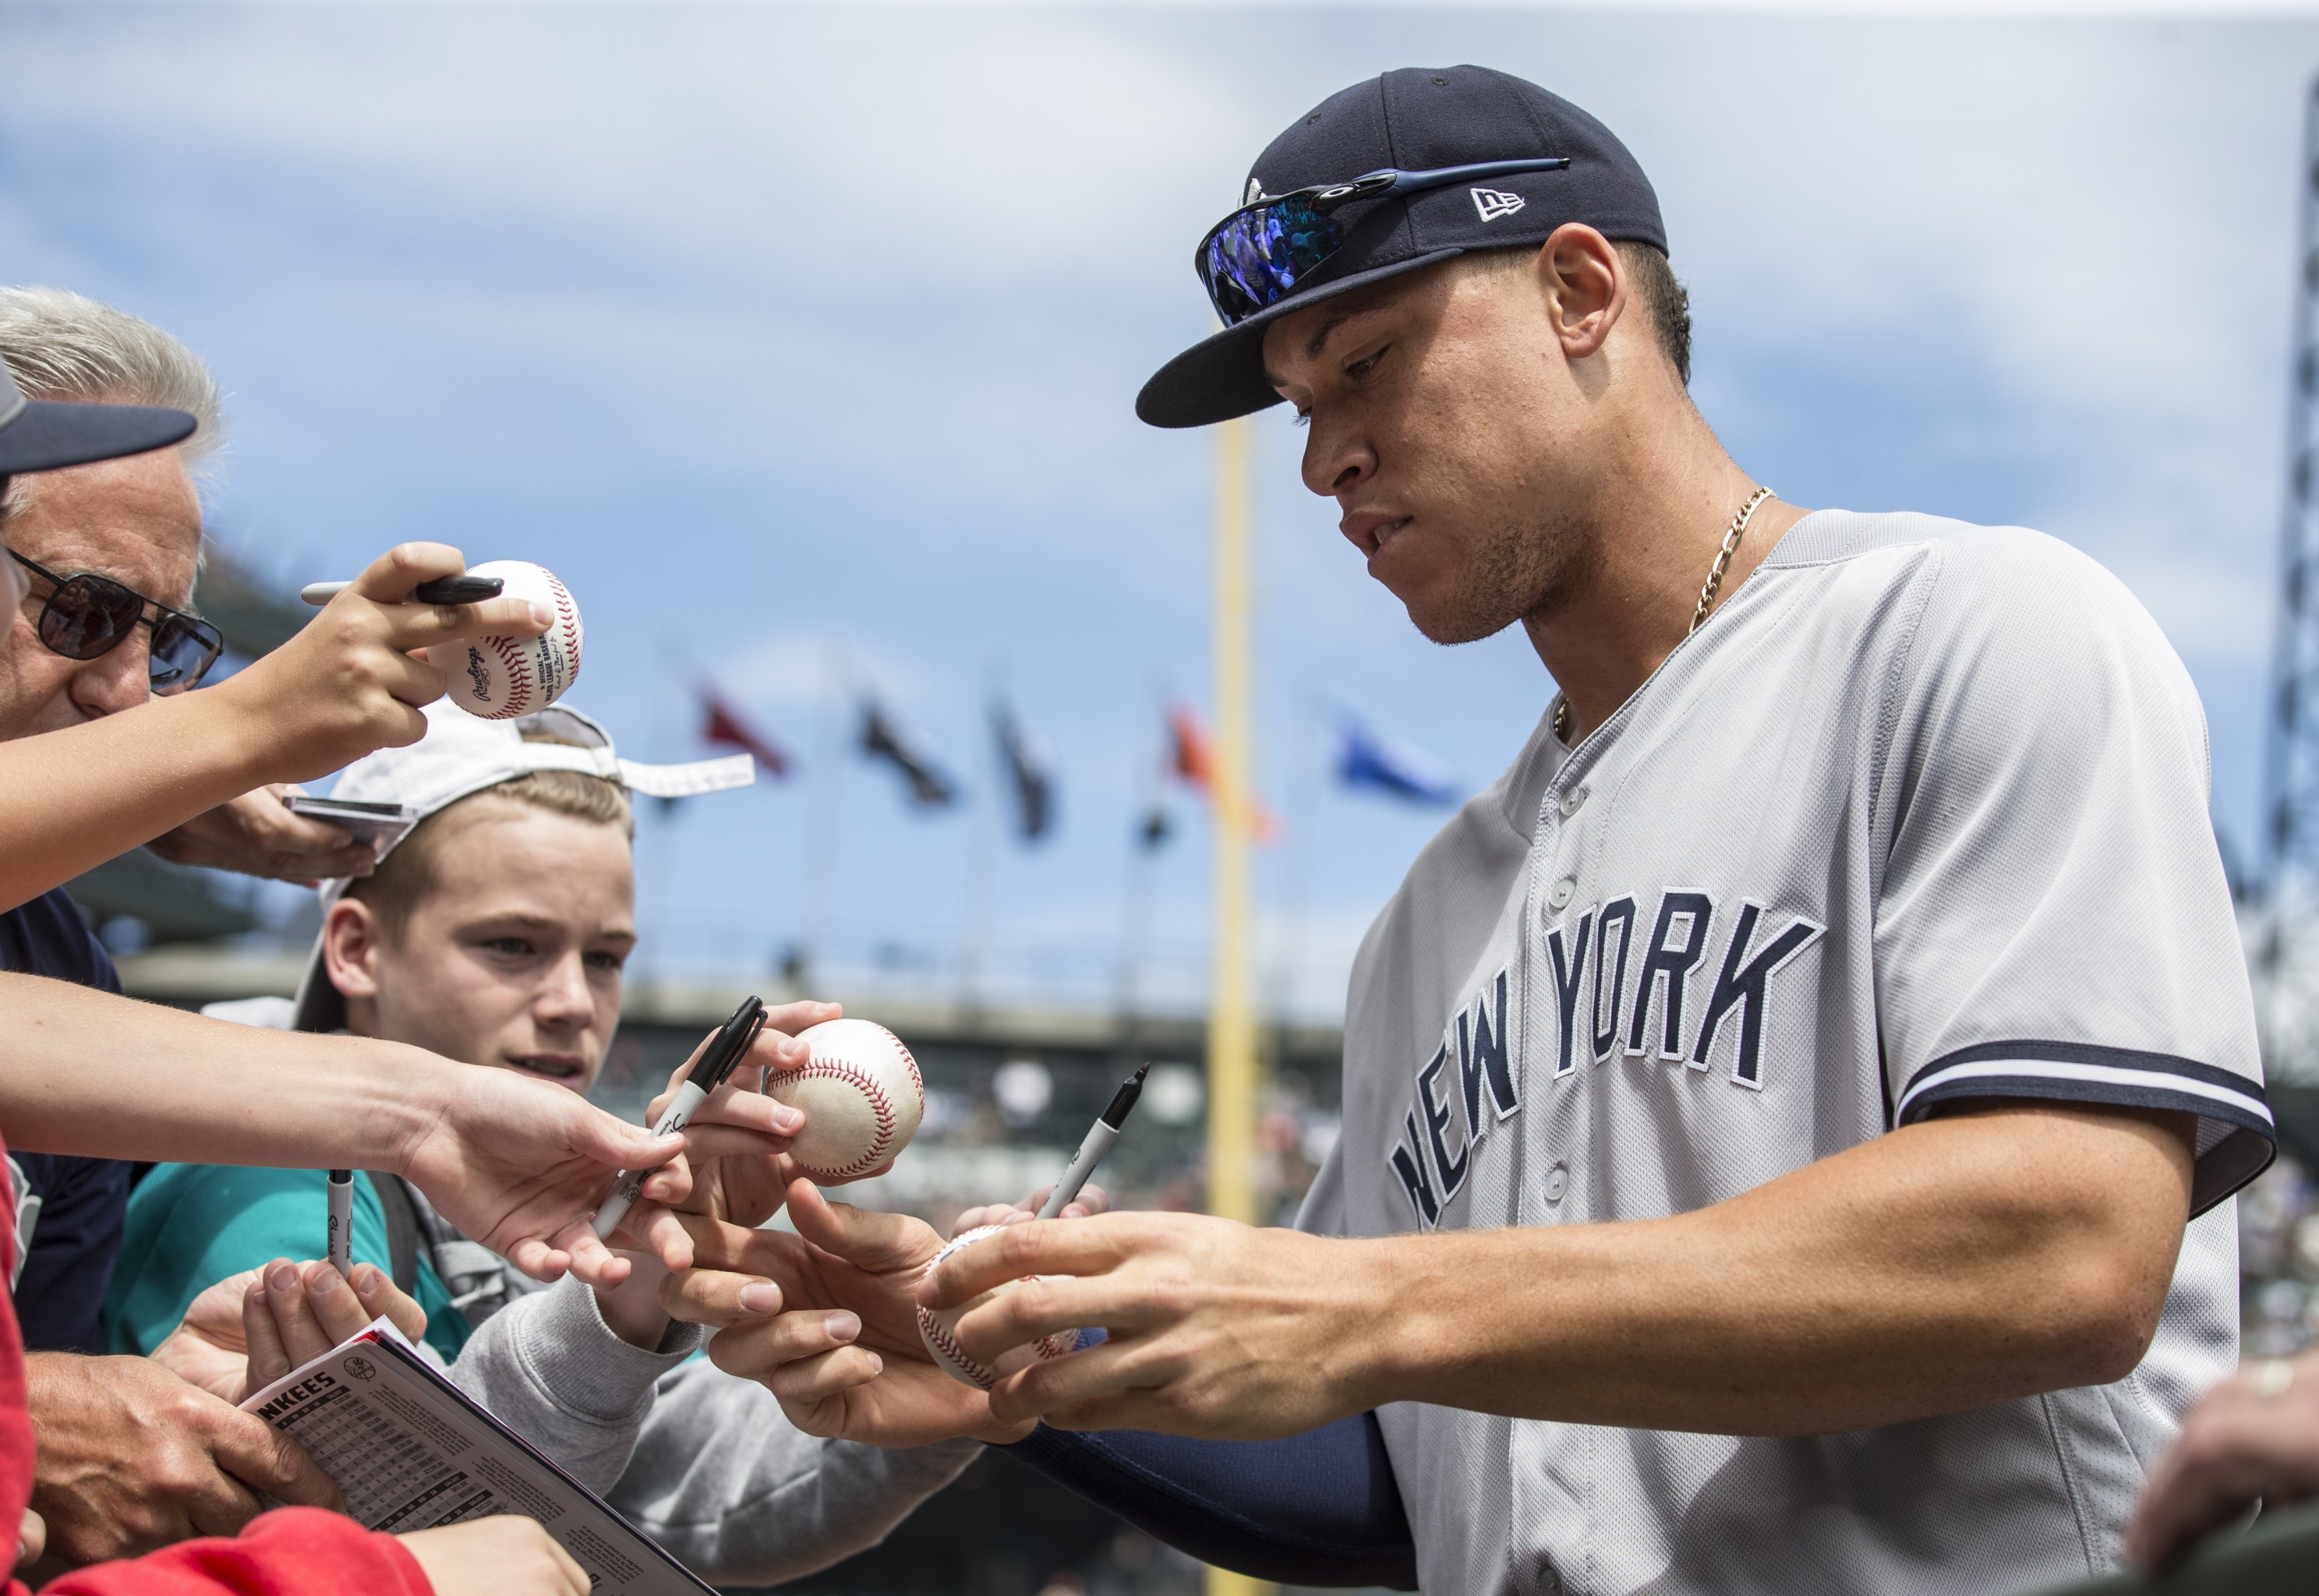 Jersey Aaron Judge Wore to Hit Final 2017 Home Run Up for Auction